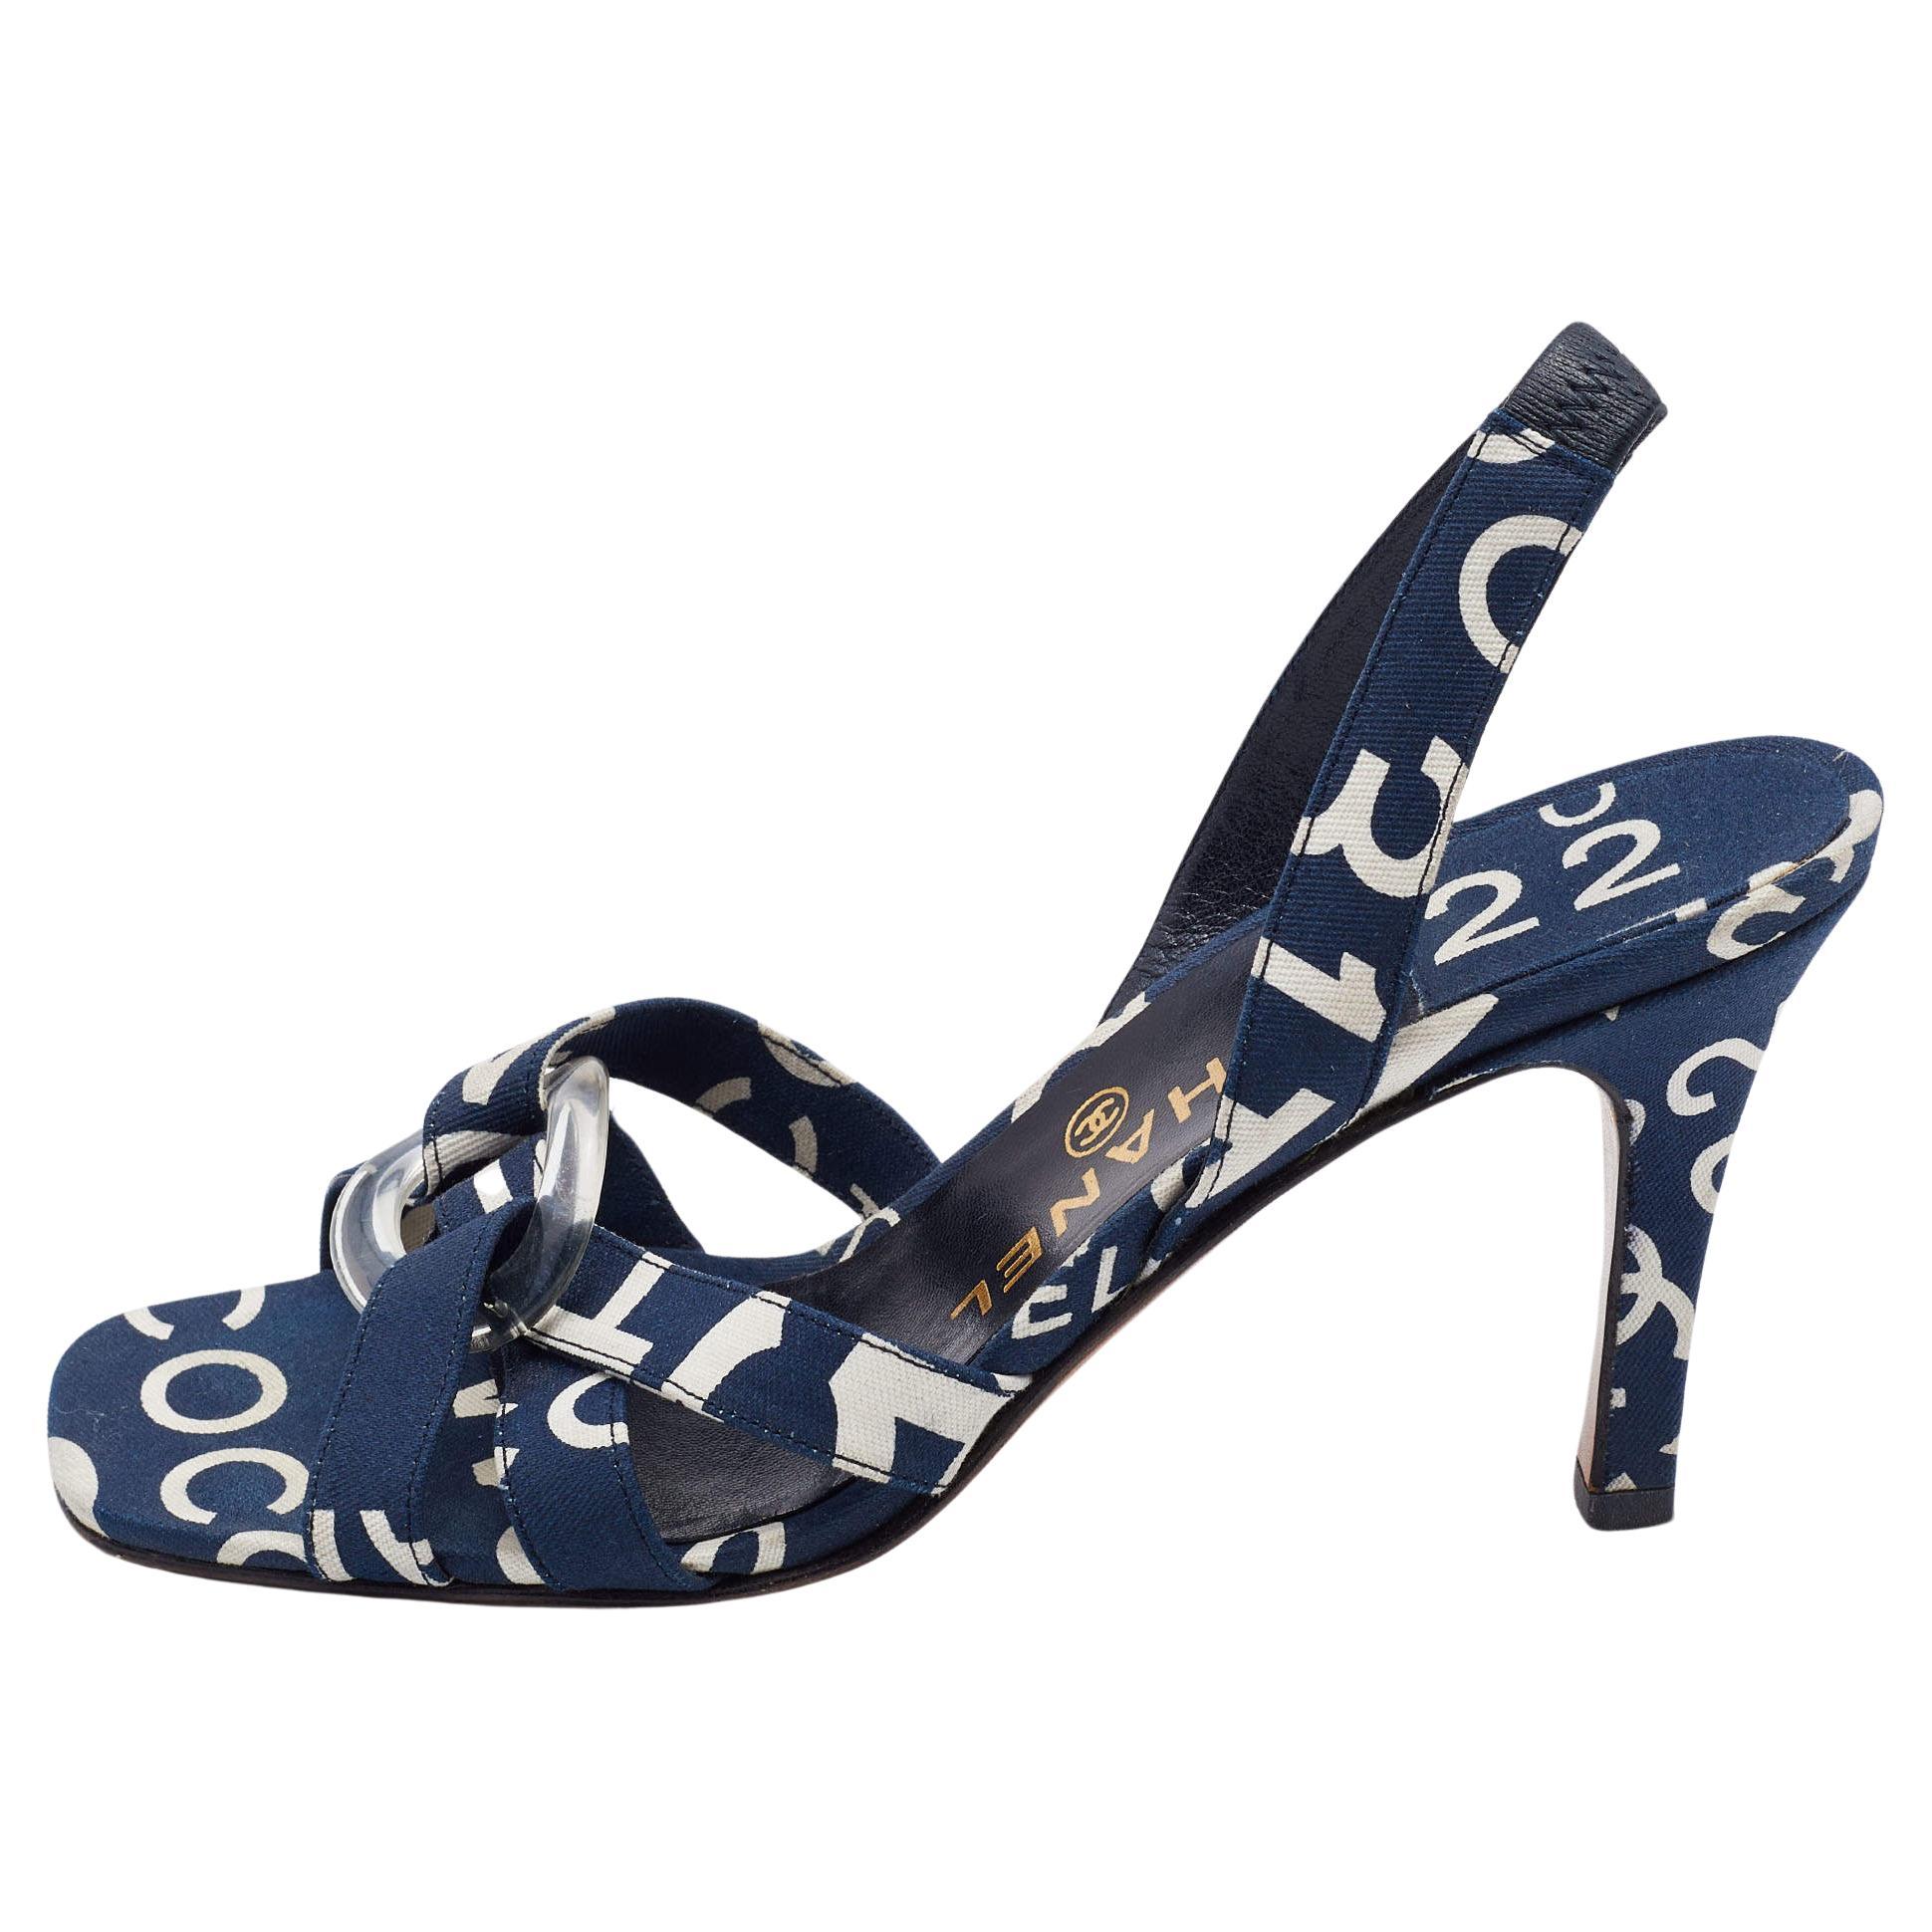 Chanel Printed Canvas Slingback Sandals